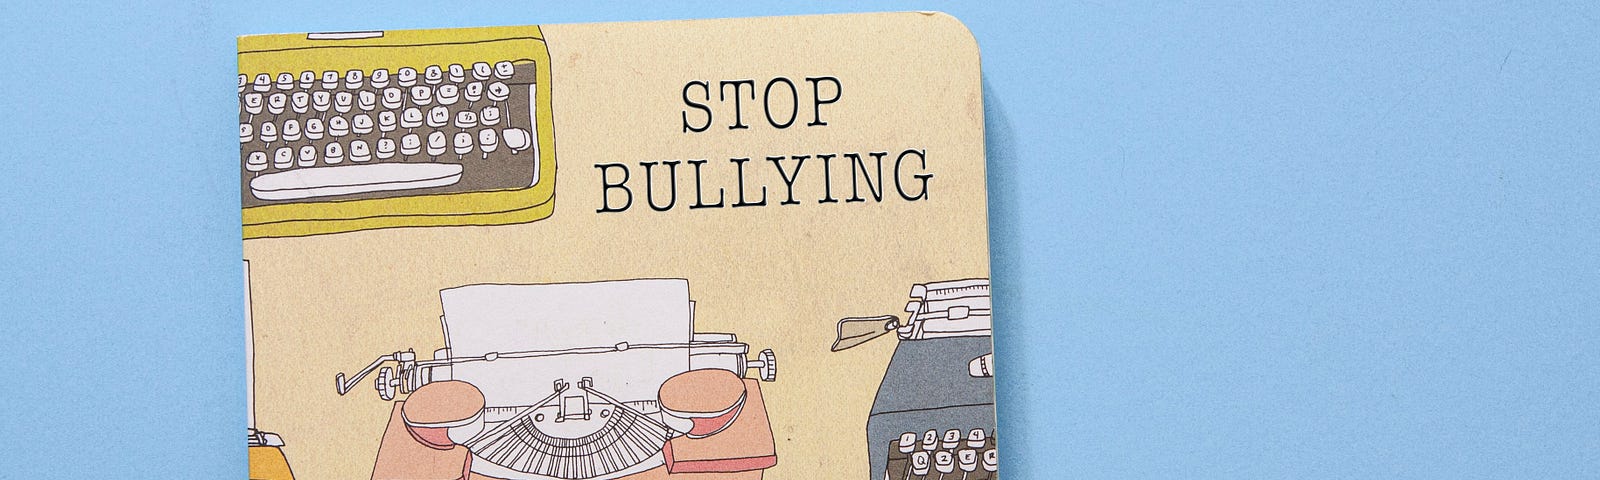 Photo that States “Stop Bullying” by Dee @ Copper and Wild on Unsplash